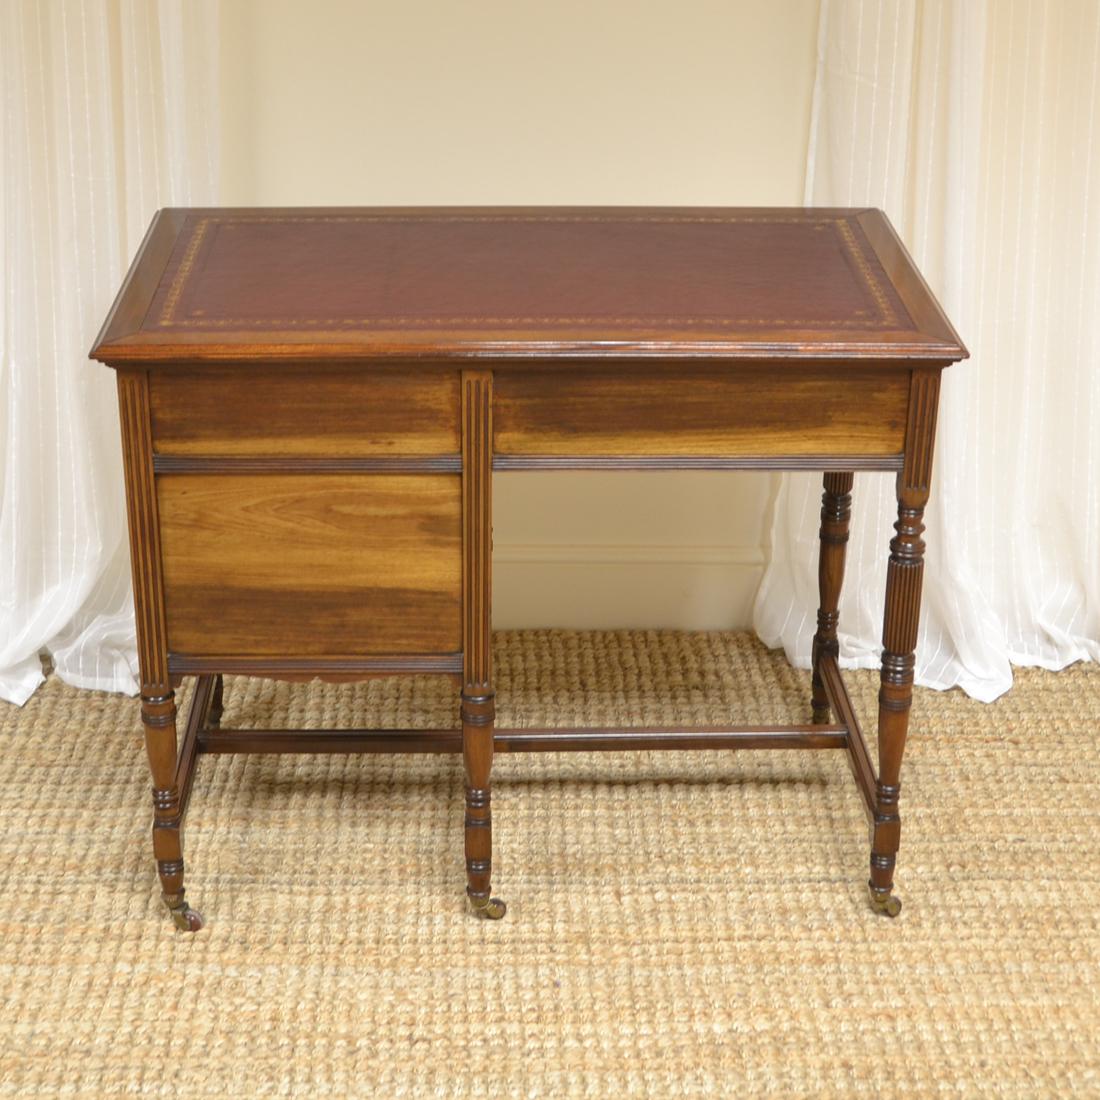 Fine quality Victorian walnut antique desk

This fine quality Victorian walnut antique desk is of nice smaller proportions and dates from circa 1890. It is of superb quality and built by a true Victorian craftsman. It has a rectangular moulded top